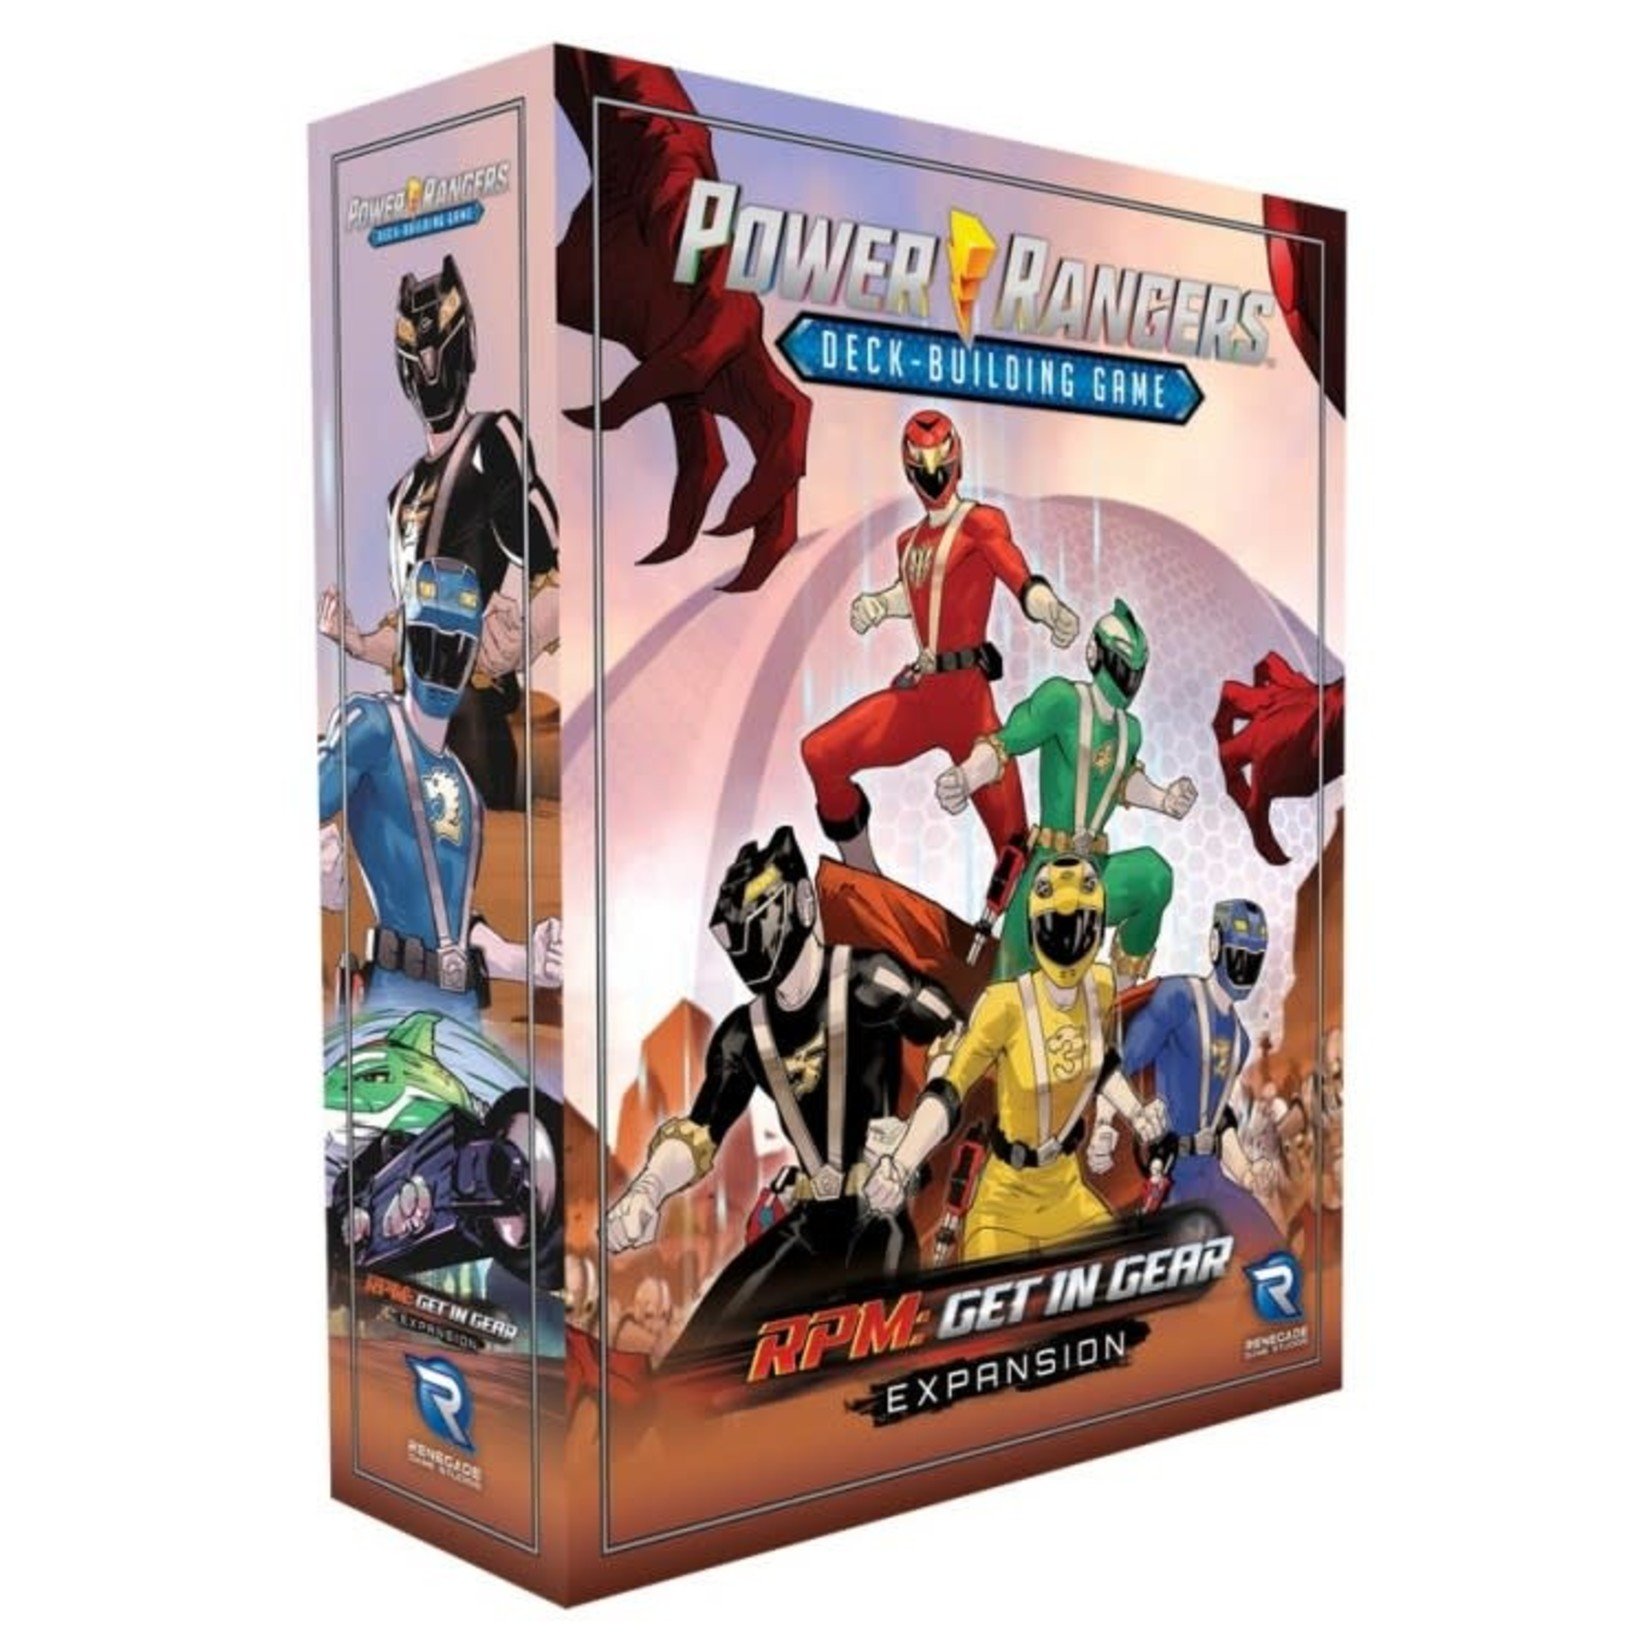 Renegade Game Studios Power Rangers Deck Building Game RPM Get in Gear Expansion